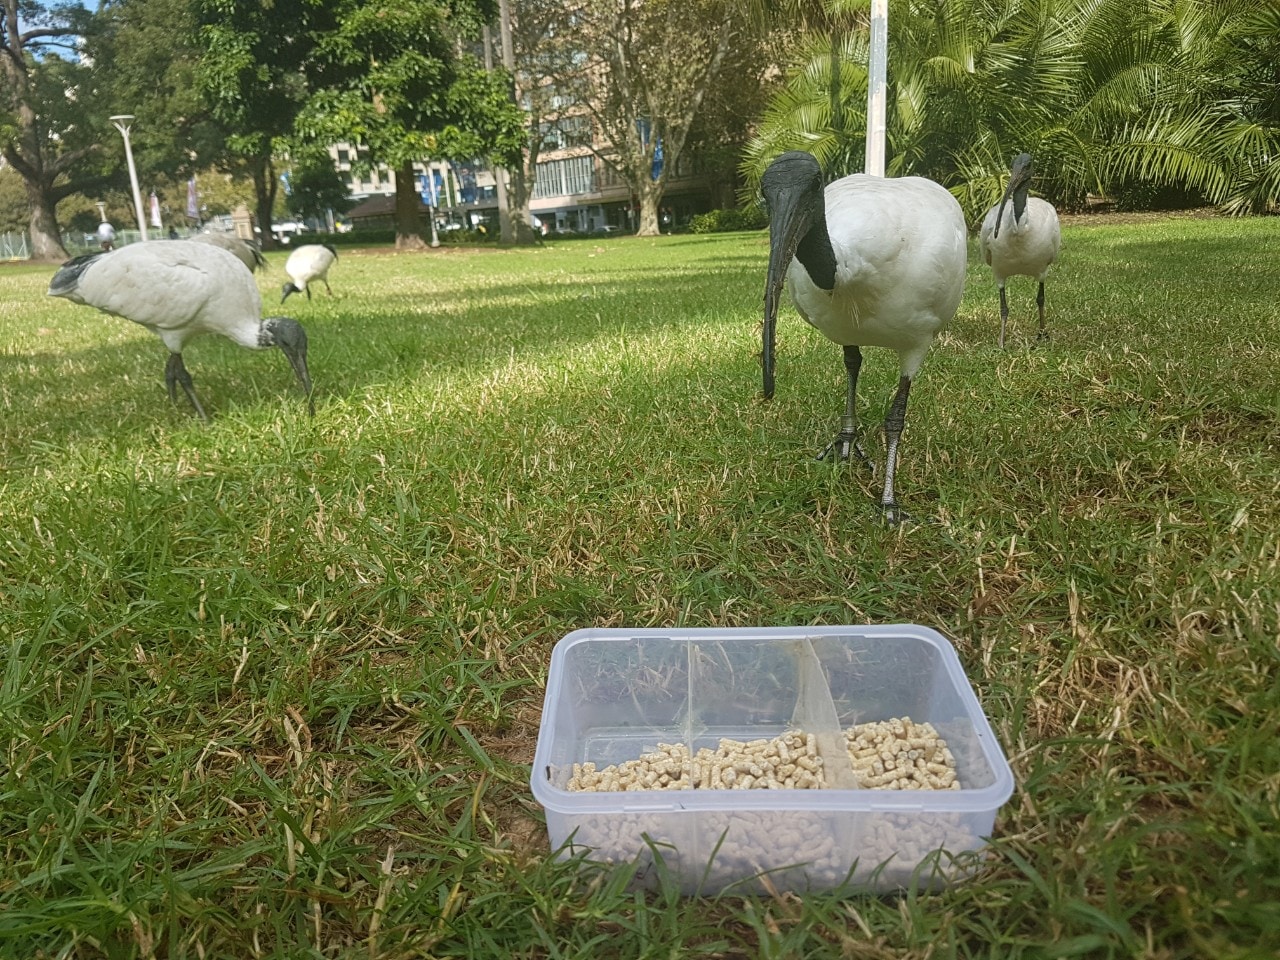 A photo of ibis about to choose what they want to eat from a container.